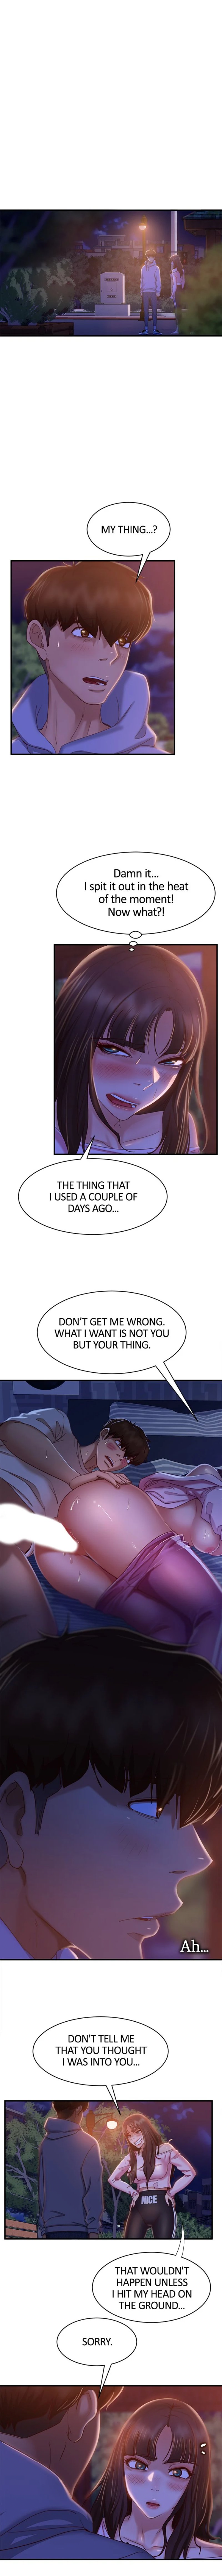 A Twisted Day - Chapter 30 Page 2